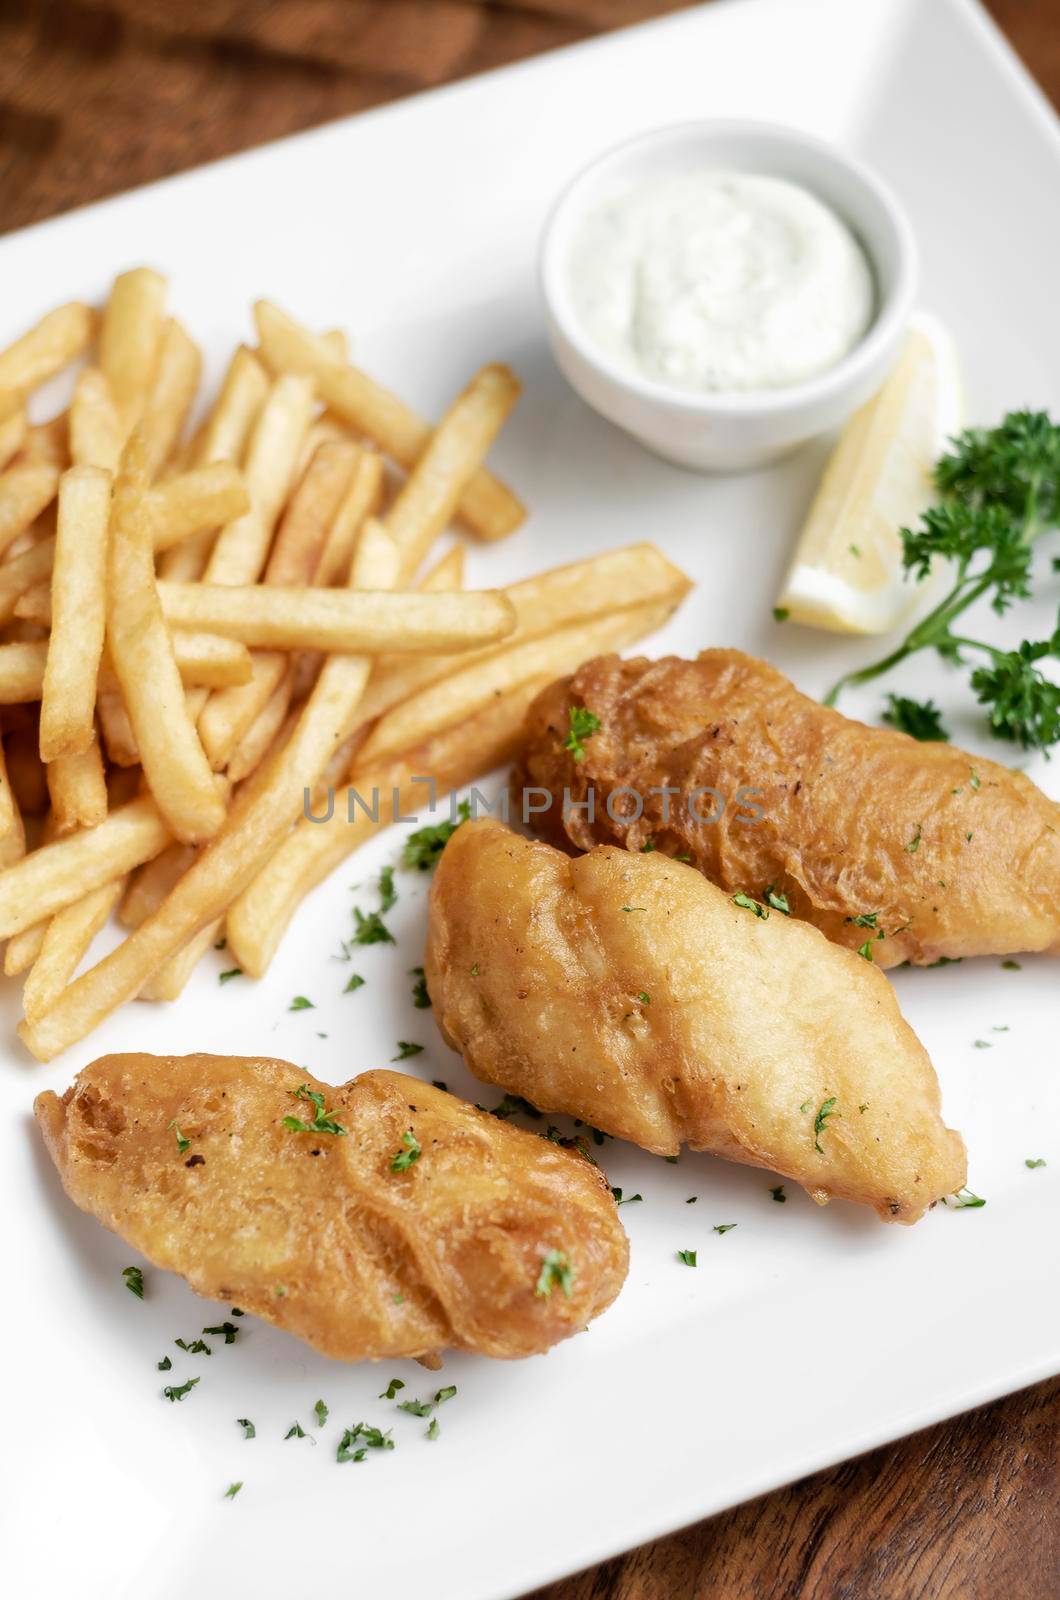 british traditional fish and chips meal on wood table